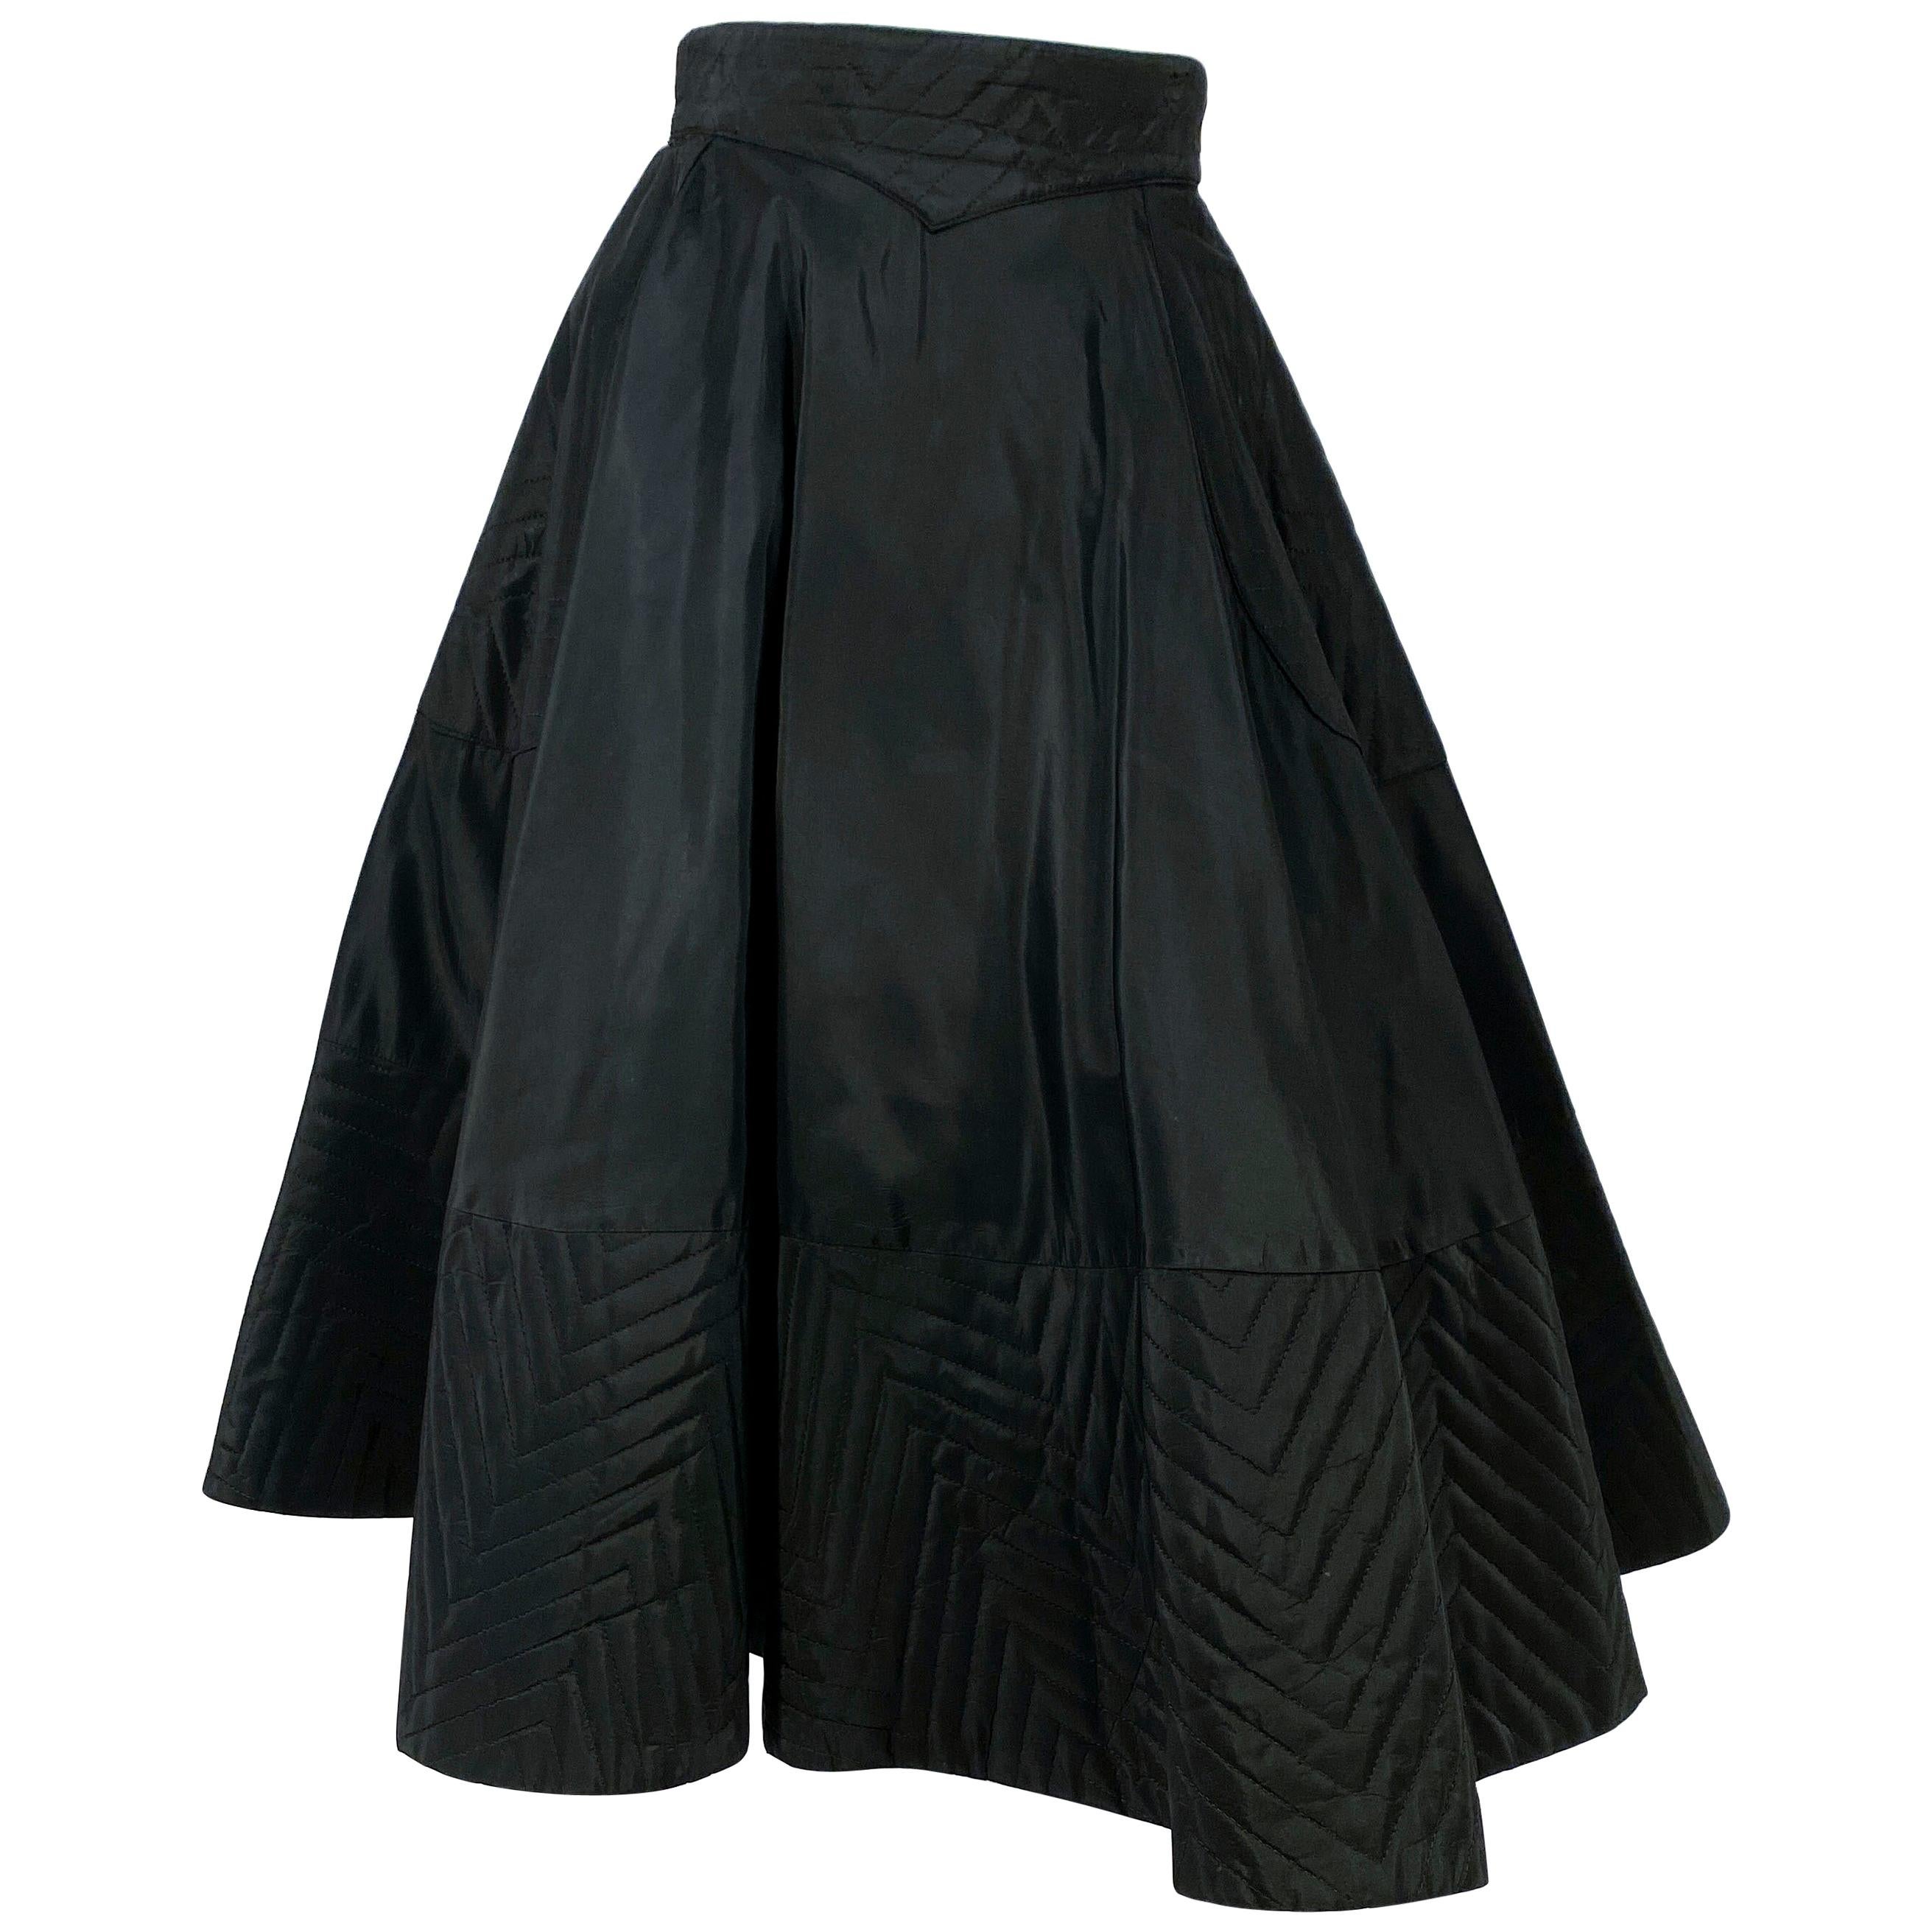 1950s Black Taffeta and Quilted Circle Skirt